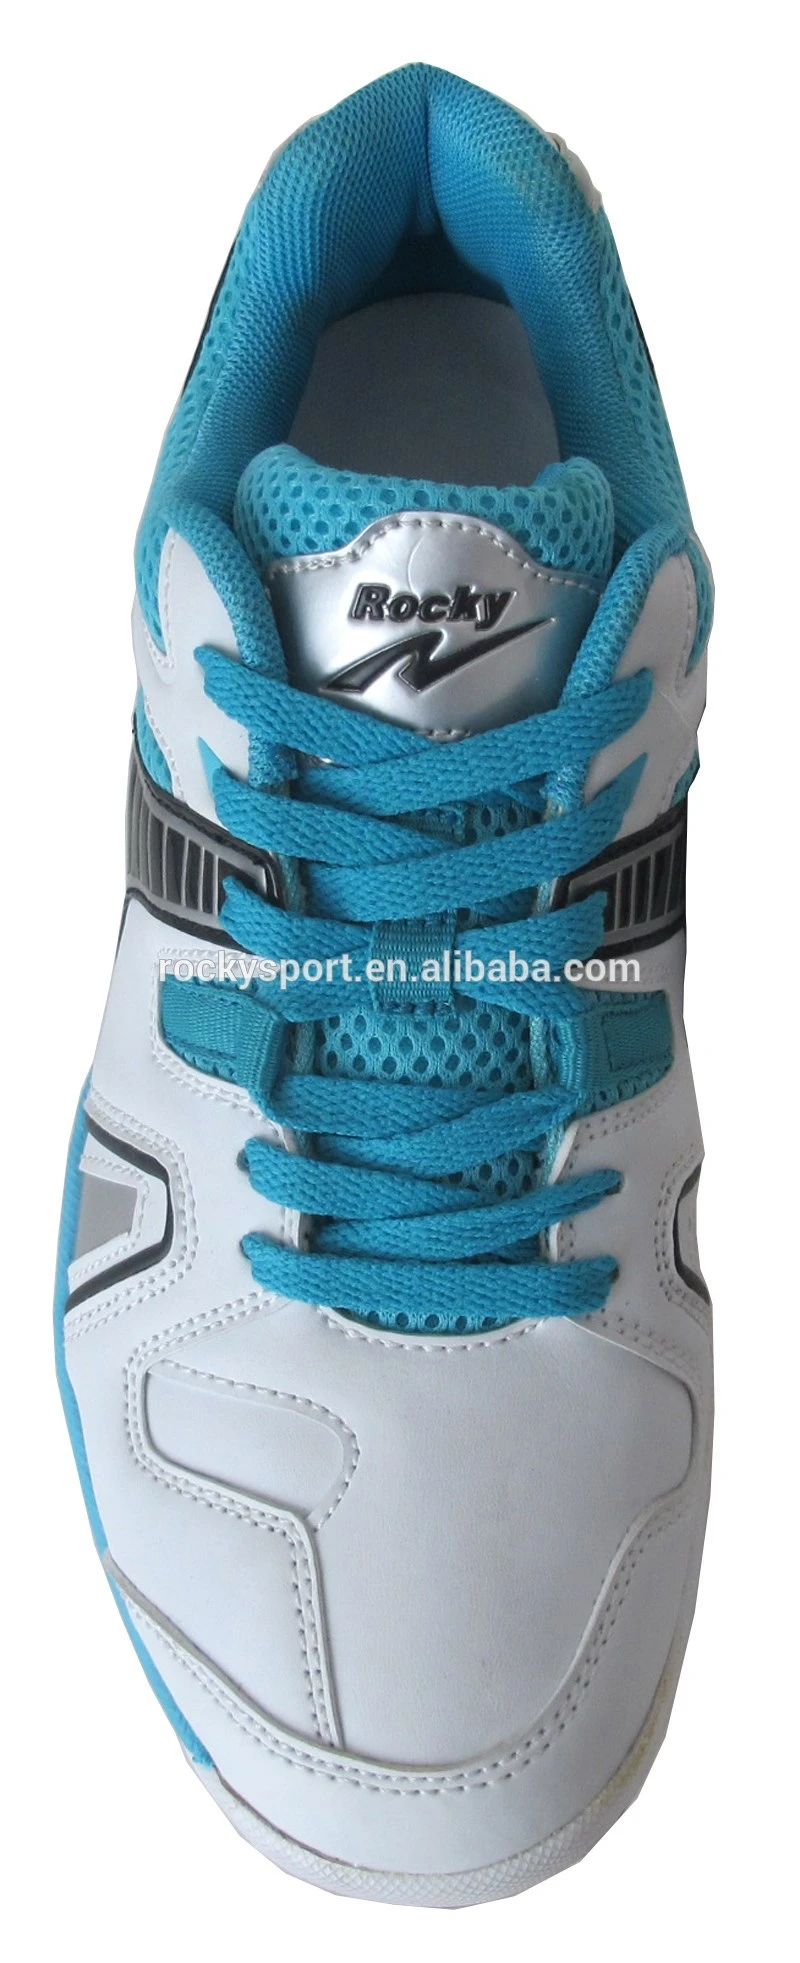 High quality badminton shoes,indoor sports shoes